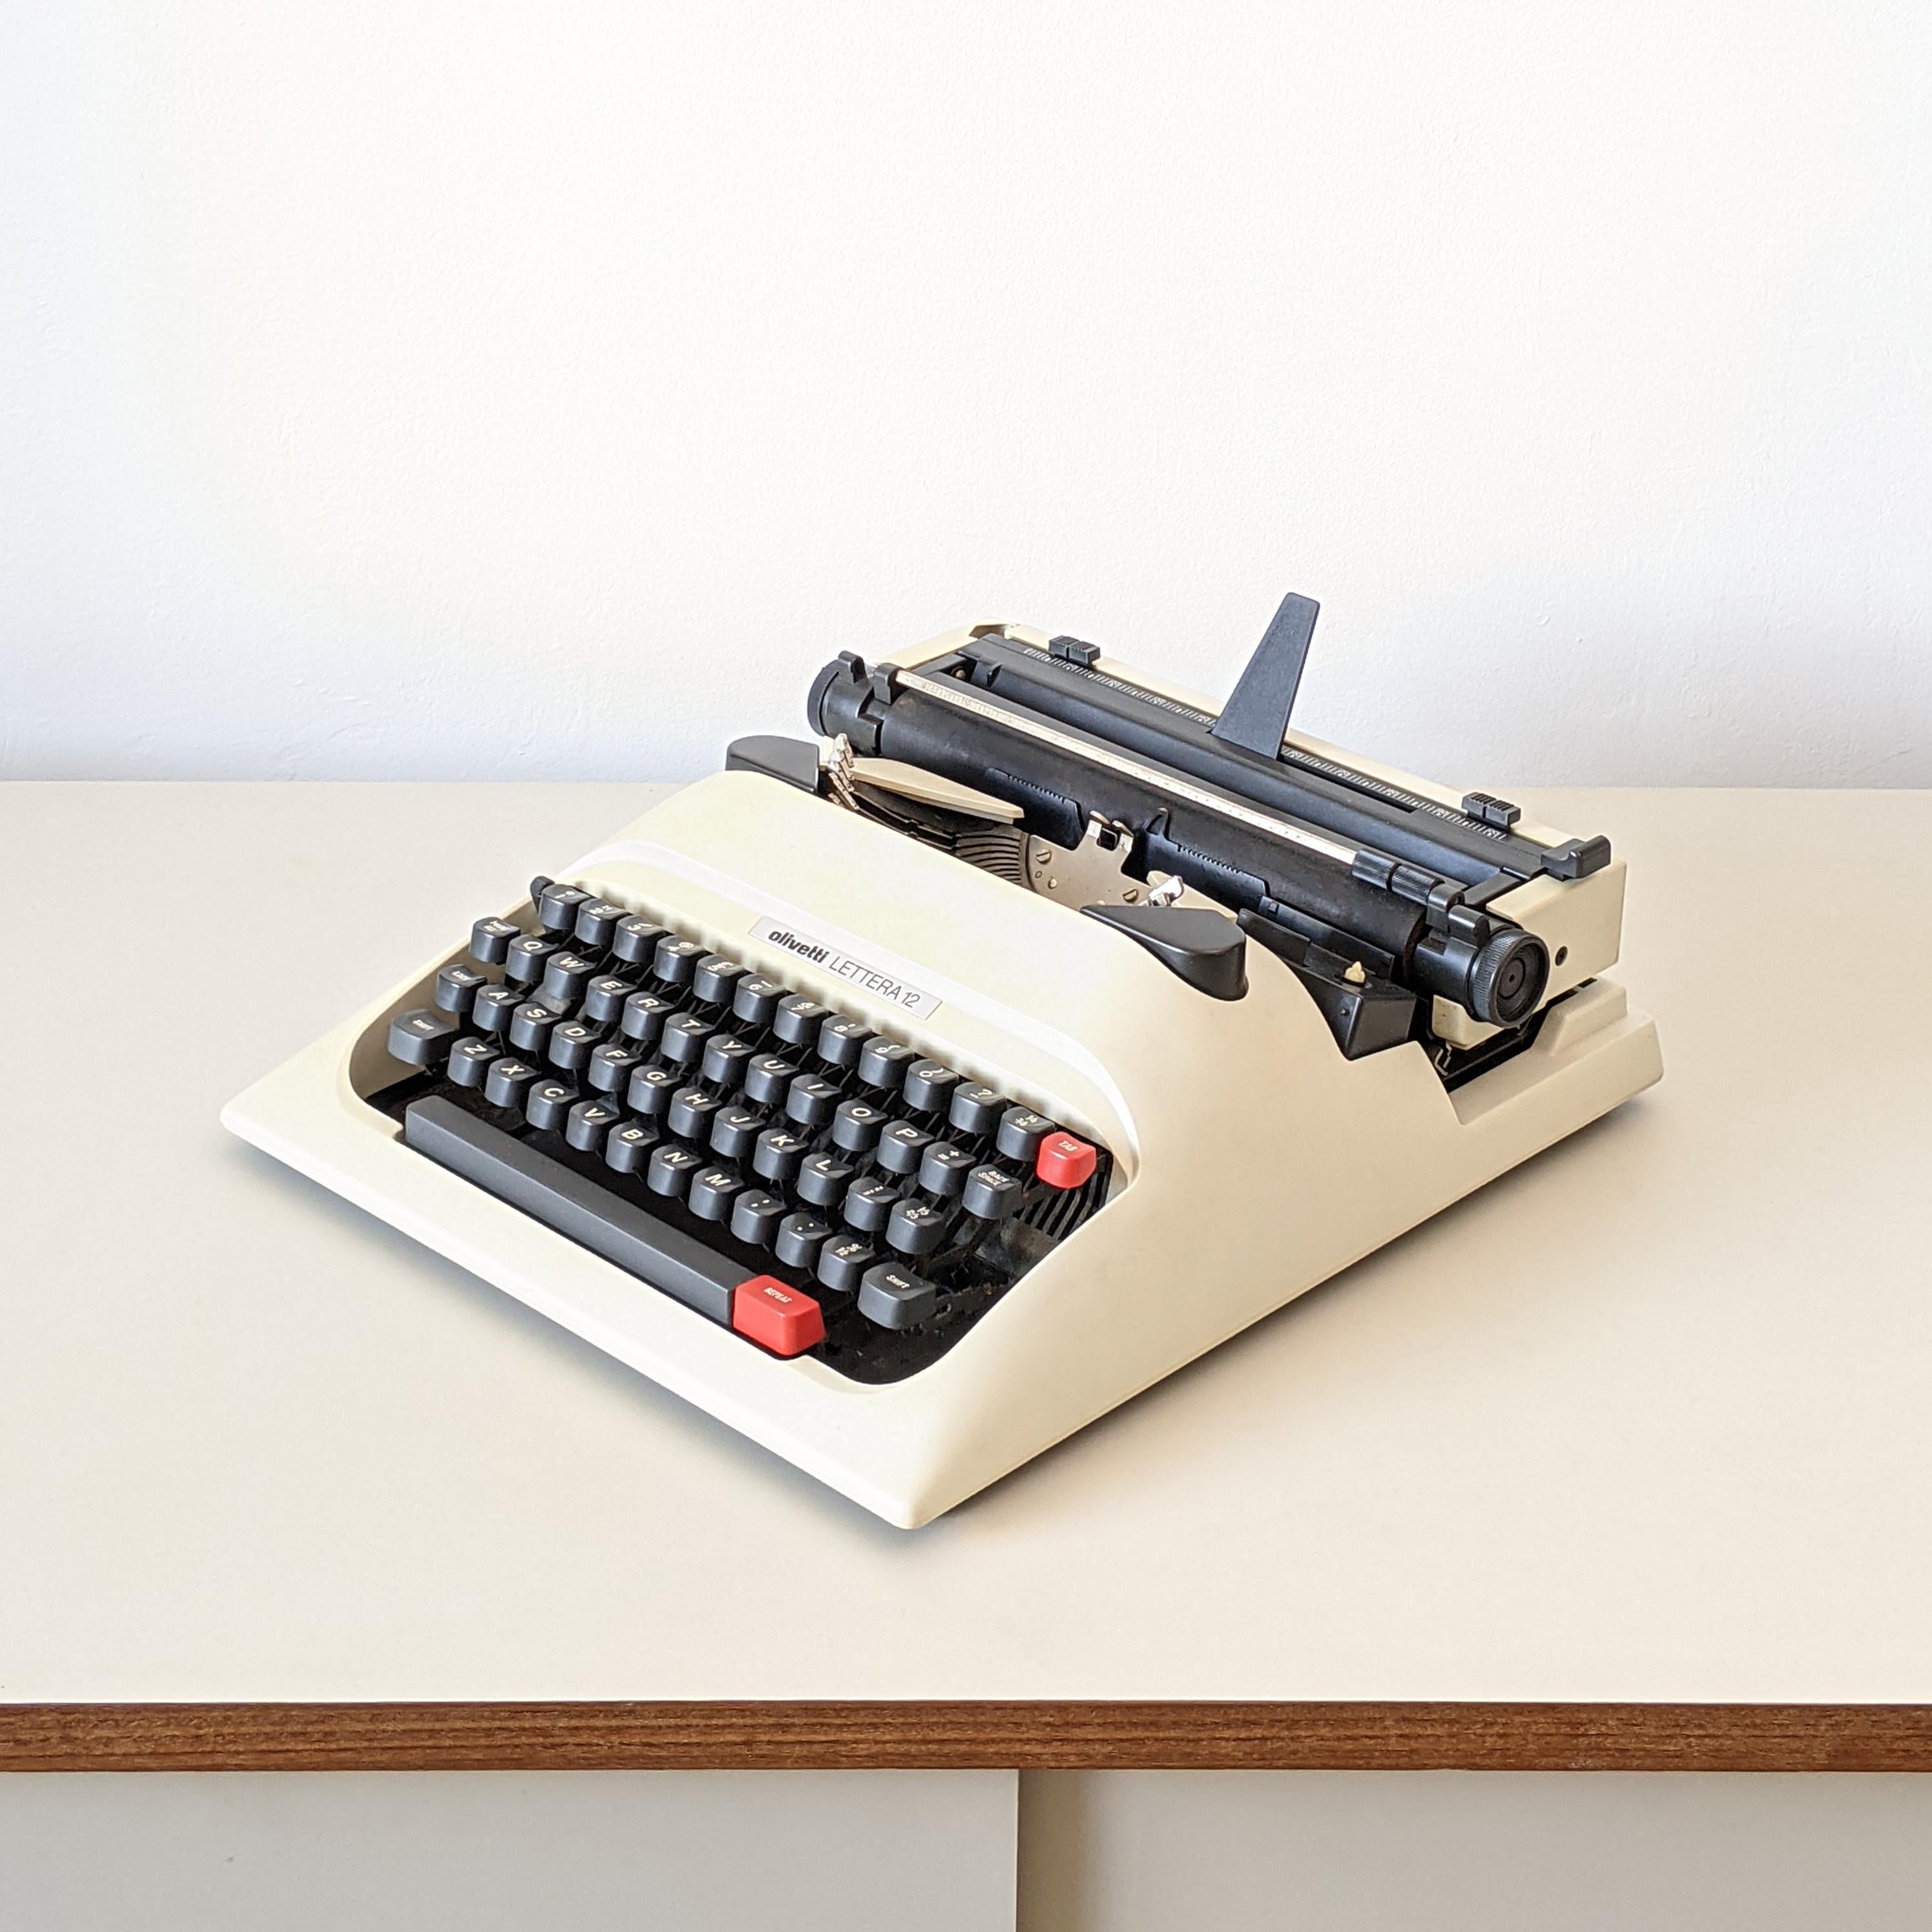 Mario Bellini (designer), Italy
Olivetti (manufacturer), Italy
Lettera 12 portable typewriter, designed 1976-77

ABS plastic (and other plastics and metals). Complete with carry case.

Condition: Fully functional. Good original condition, with